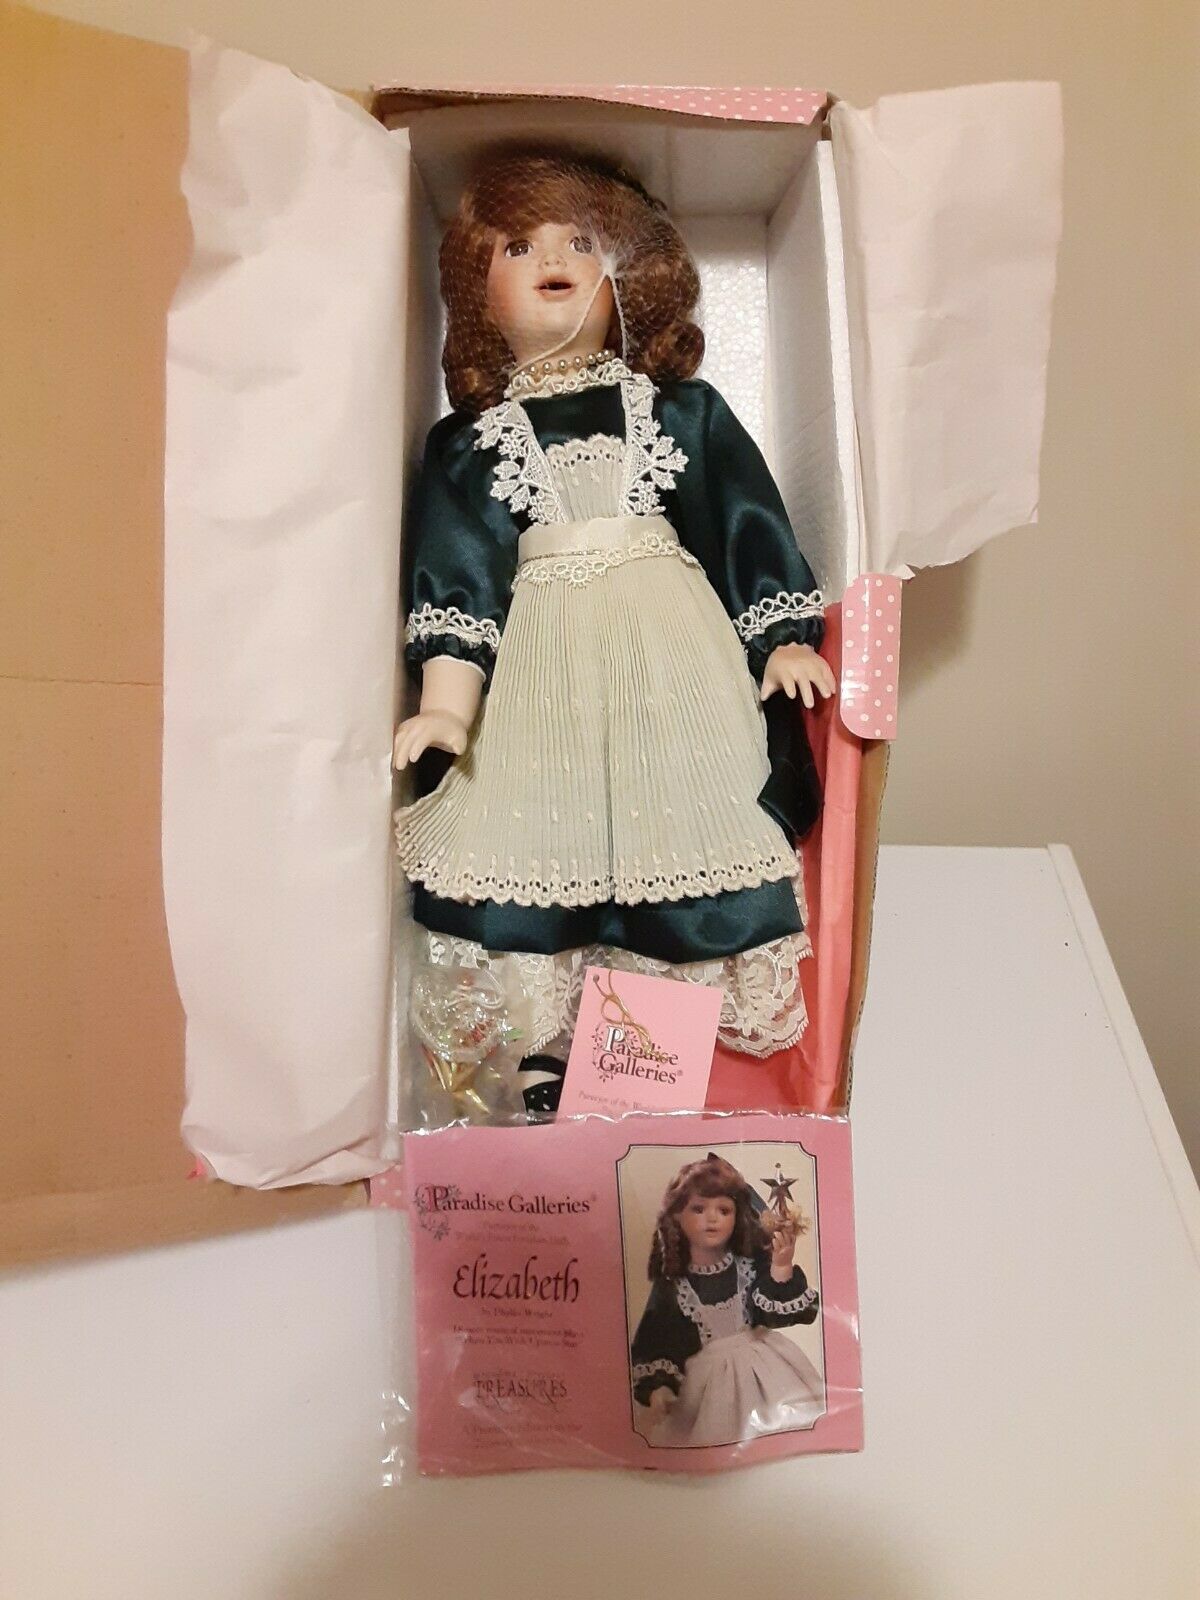 Paradise Galleries Treasury Collection Elizabeth  Porcelain Doll 14" Tall